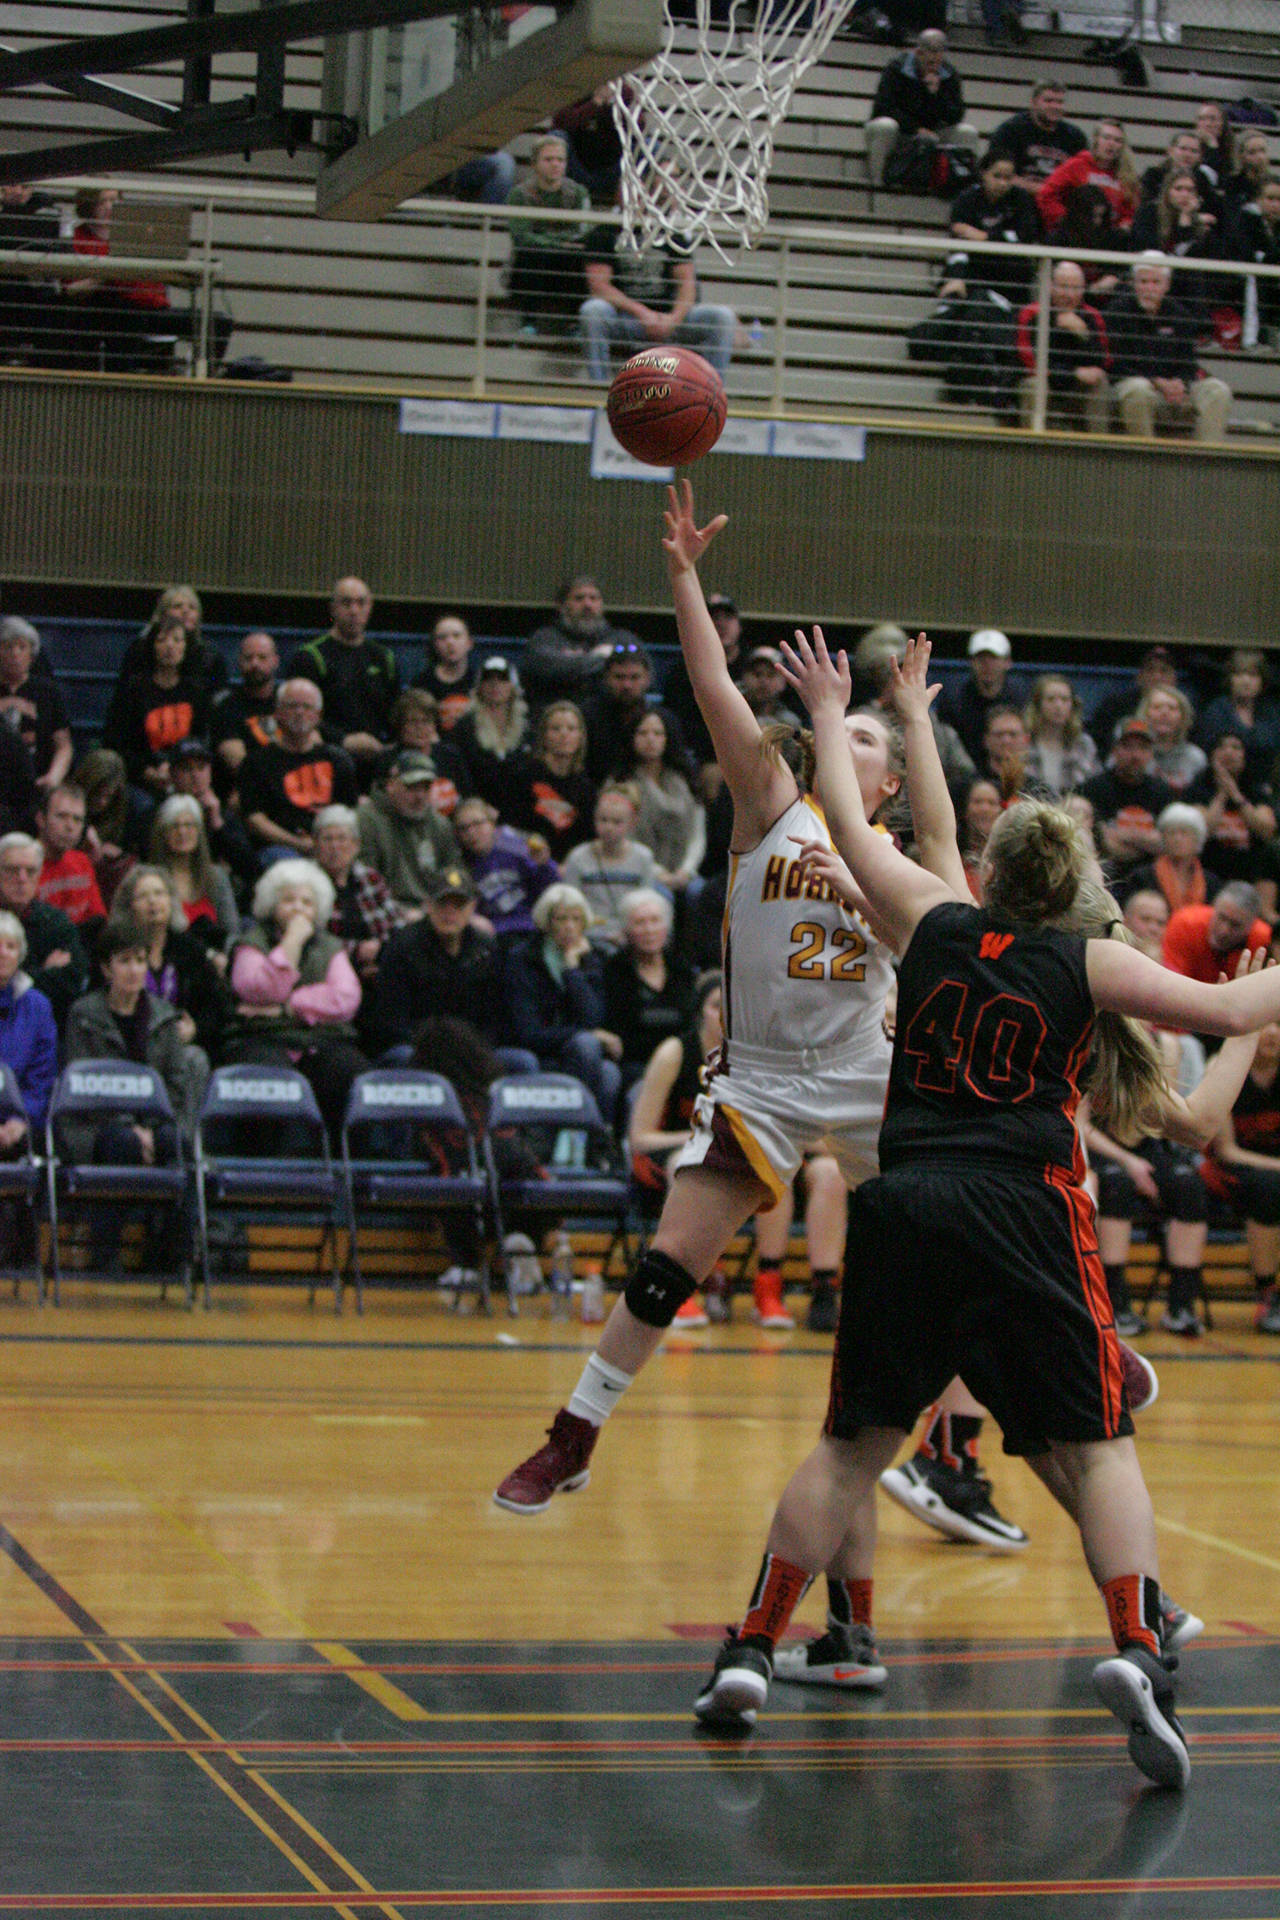 The Hornets beat Washougal 63-53 in a foul-heavy game. Photos by Dennis Box.